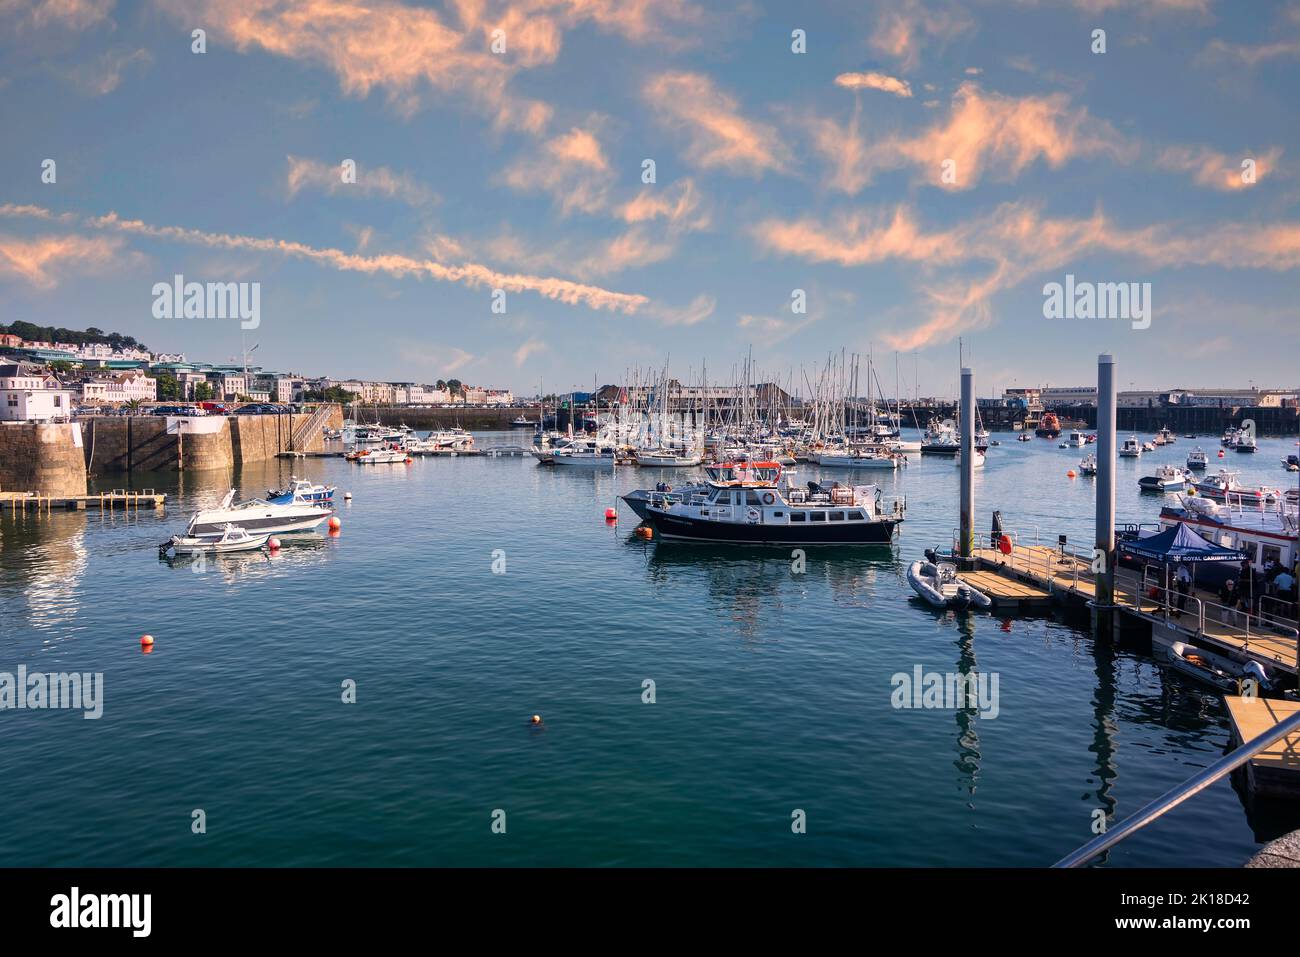 St. Peter Port, Guernsey -August 6, 2018: Saint Peter Port is the capital of Guernsey as well as the main port. Stock Photo